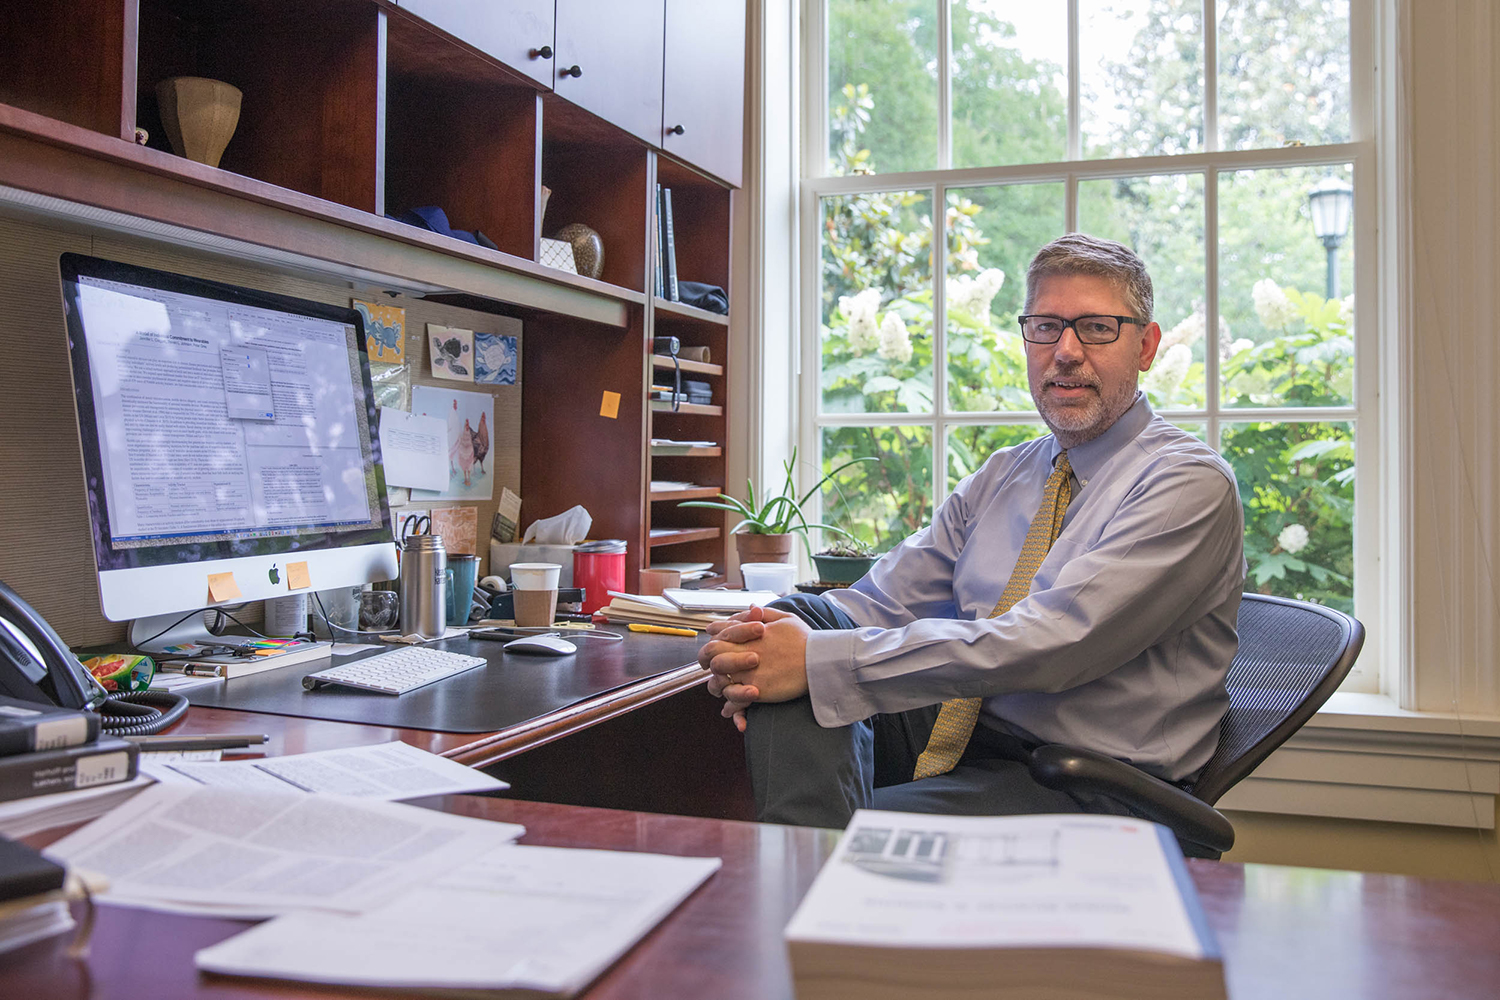 Steven L. Johnson sits at his desk working